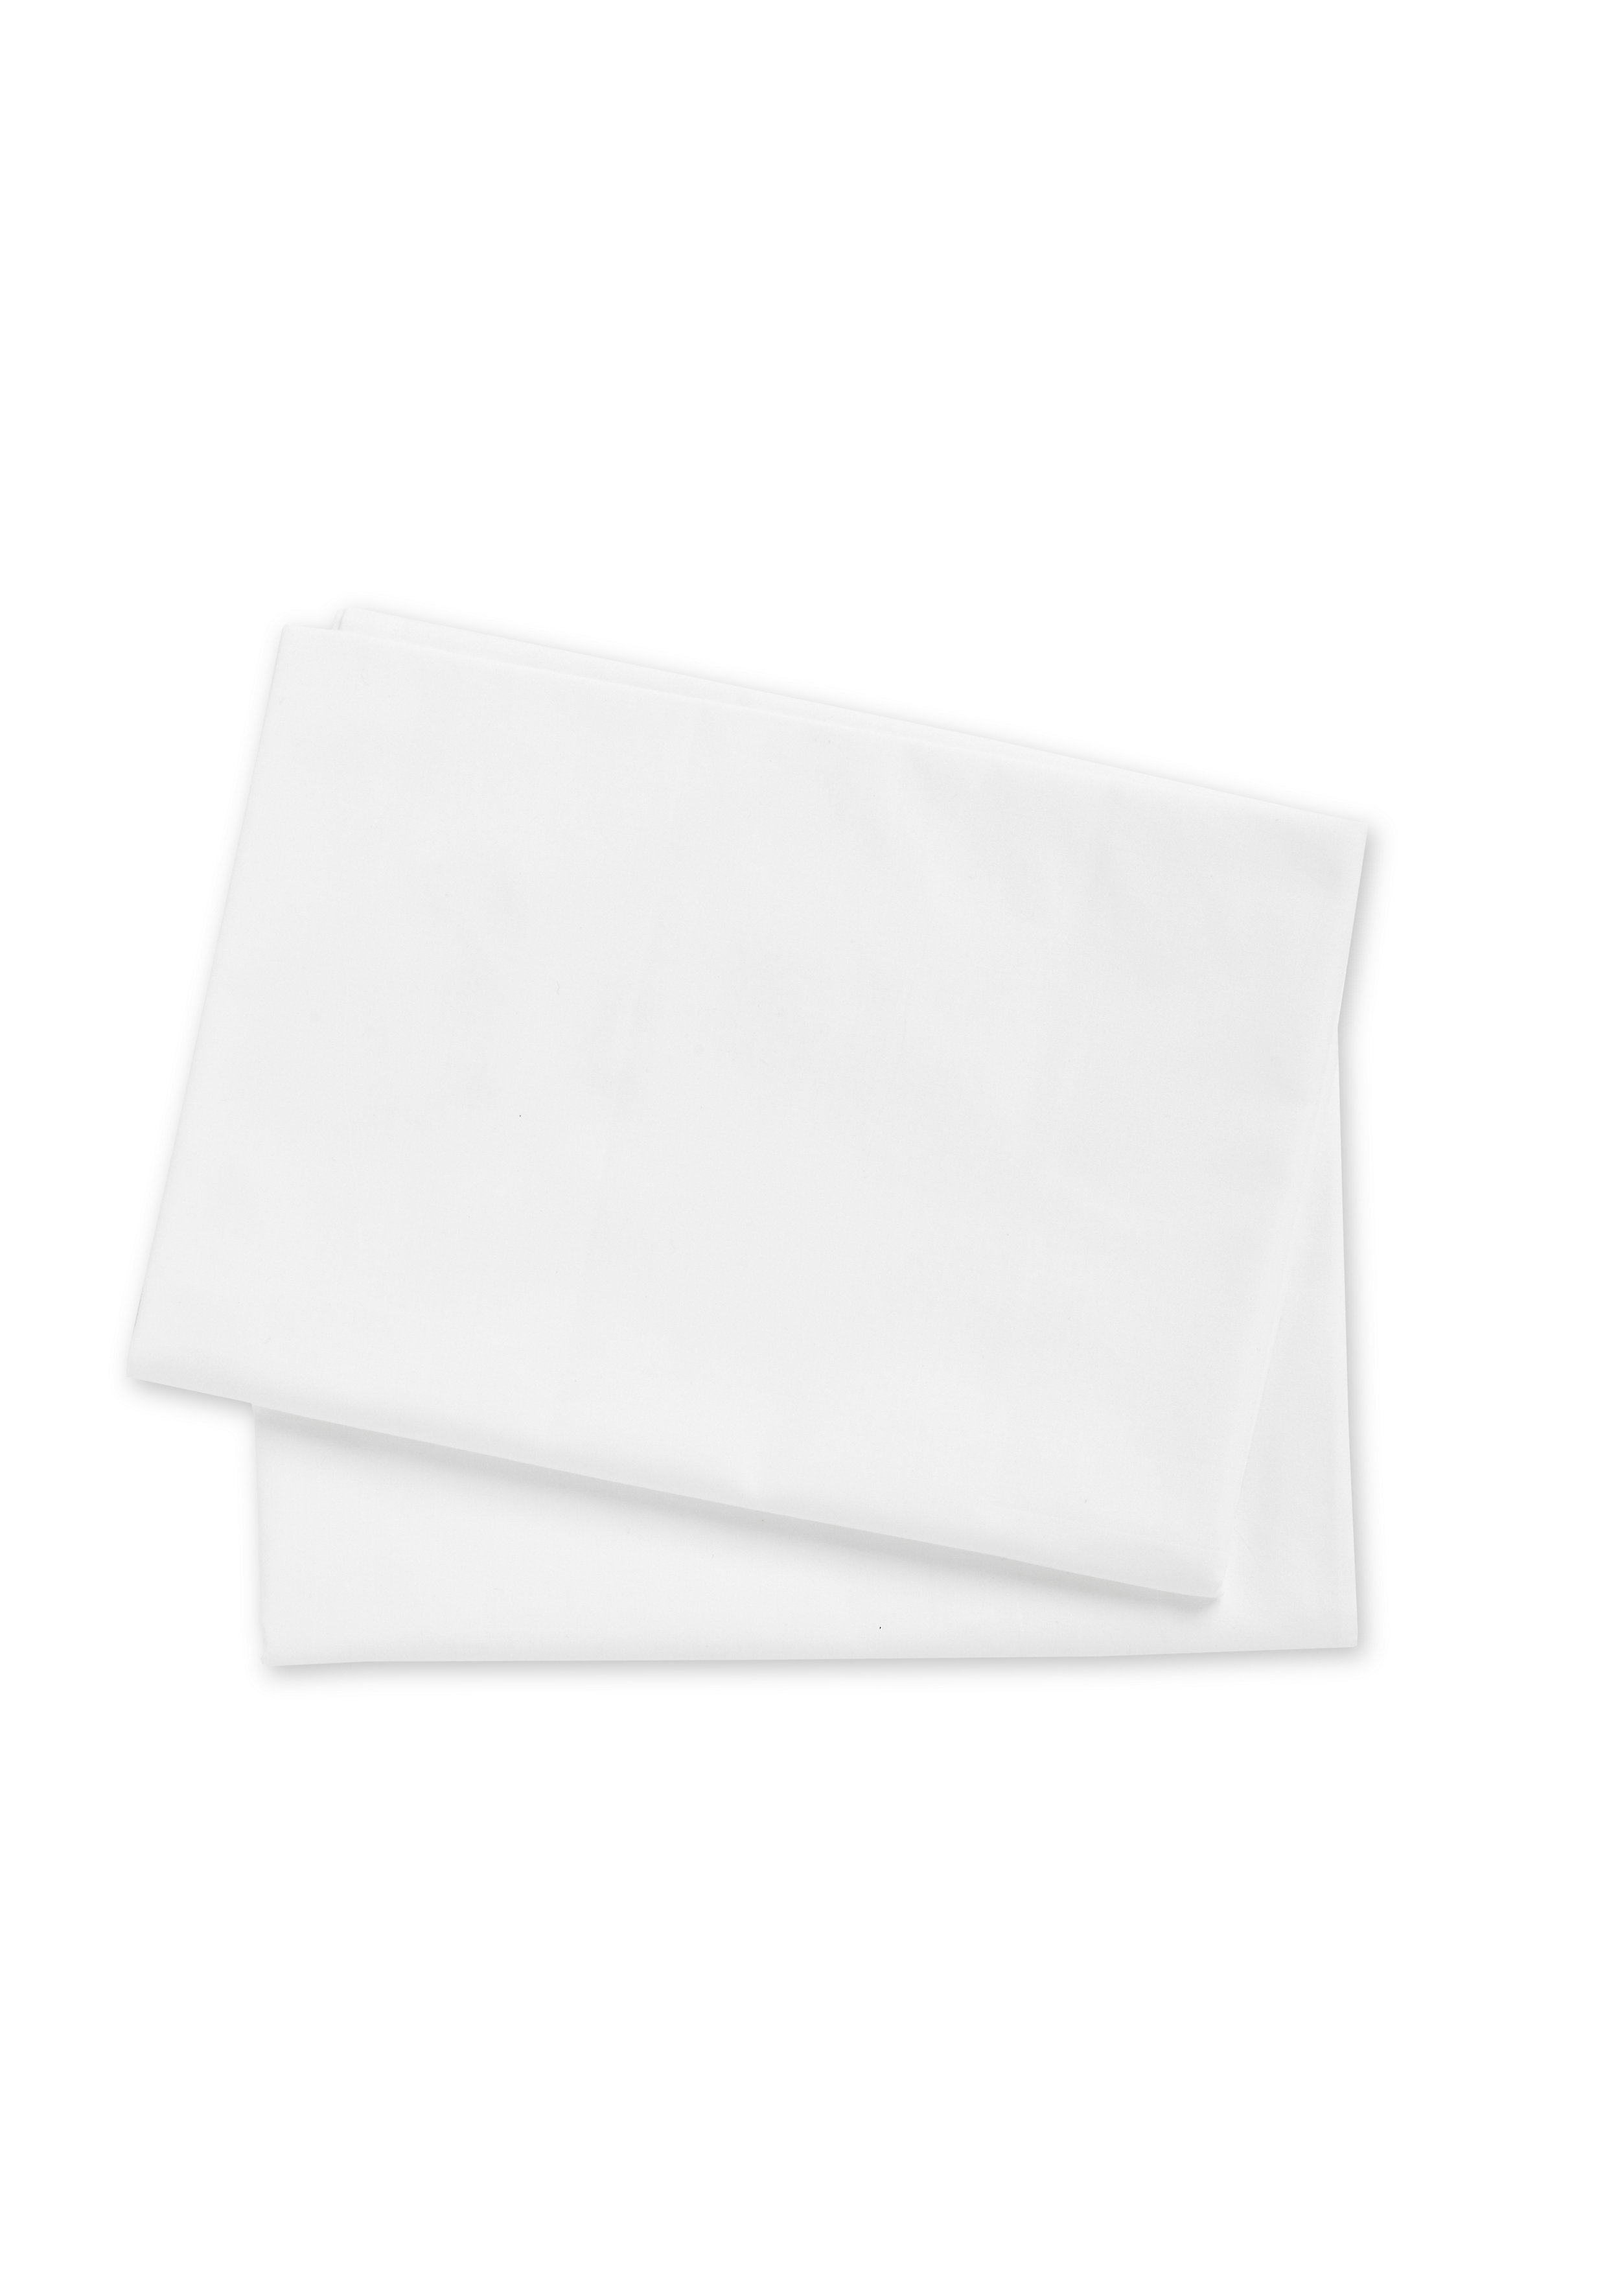 Mothercare | Mothercare White Cotton-Rich Fitted Cot Bed Sheets Pack of 2 White